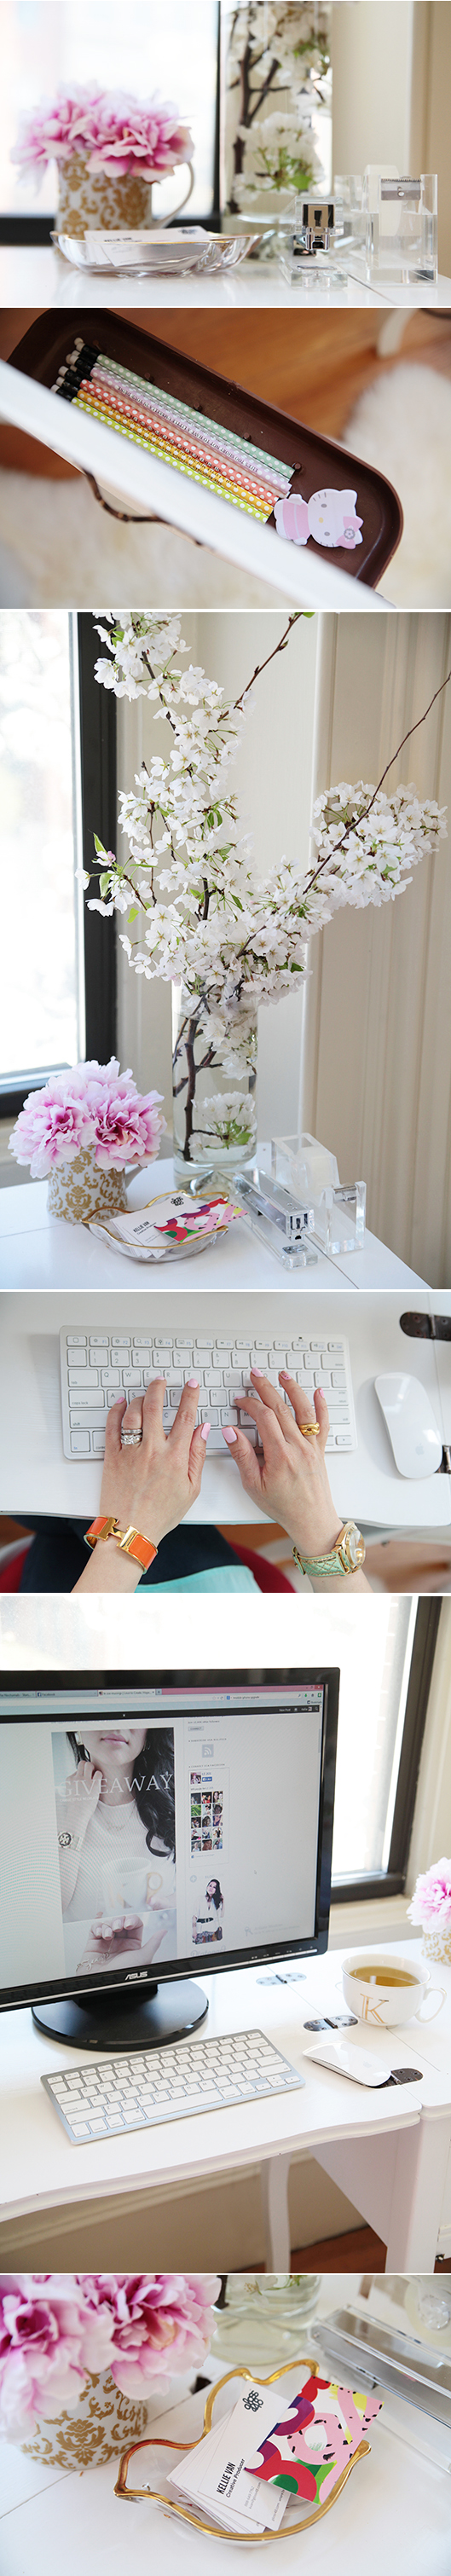 desk makeover2 by le zoe musings